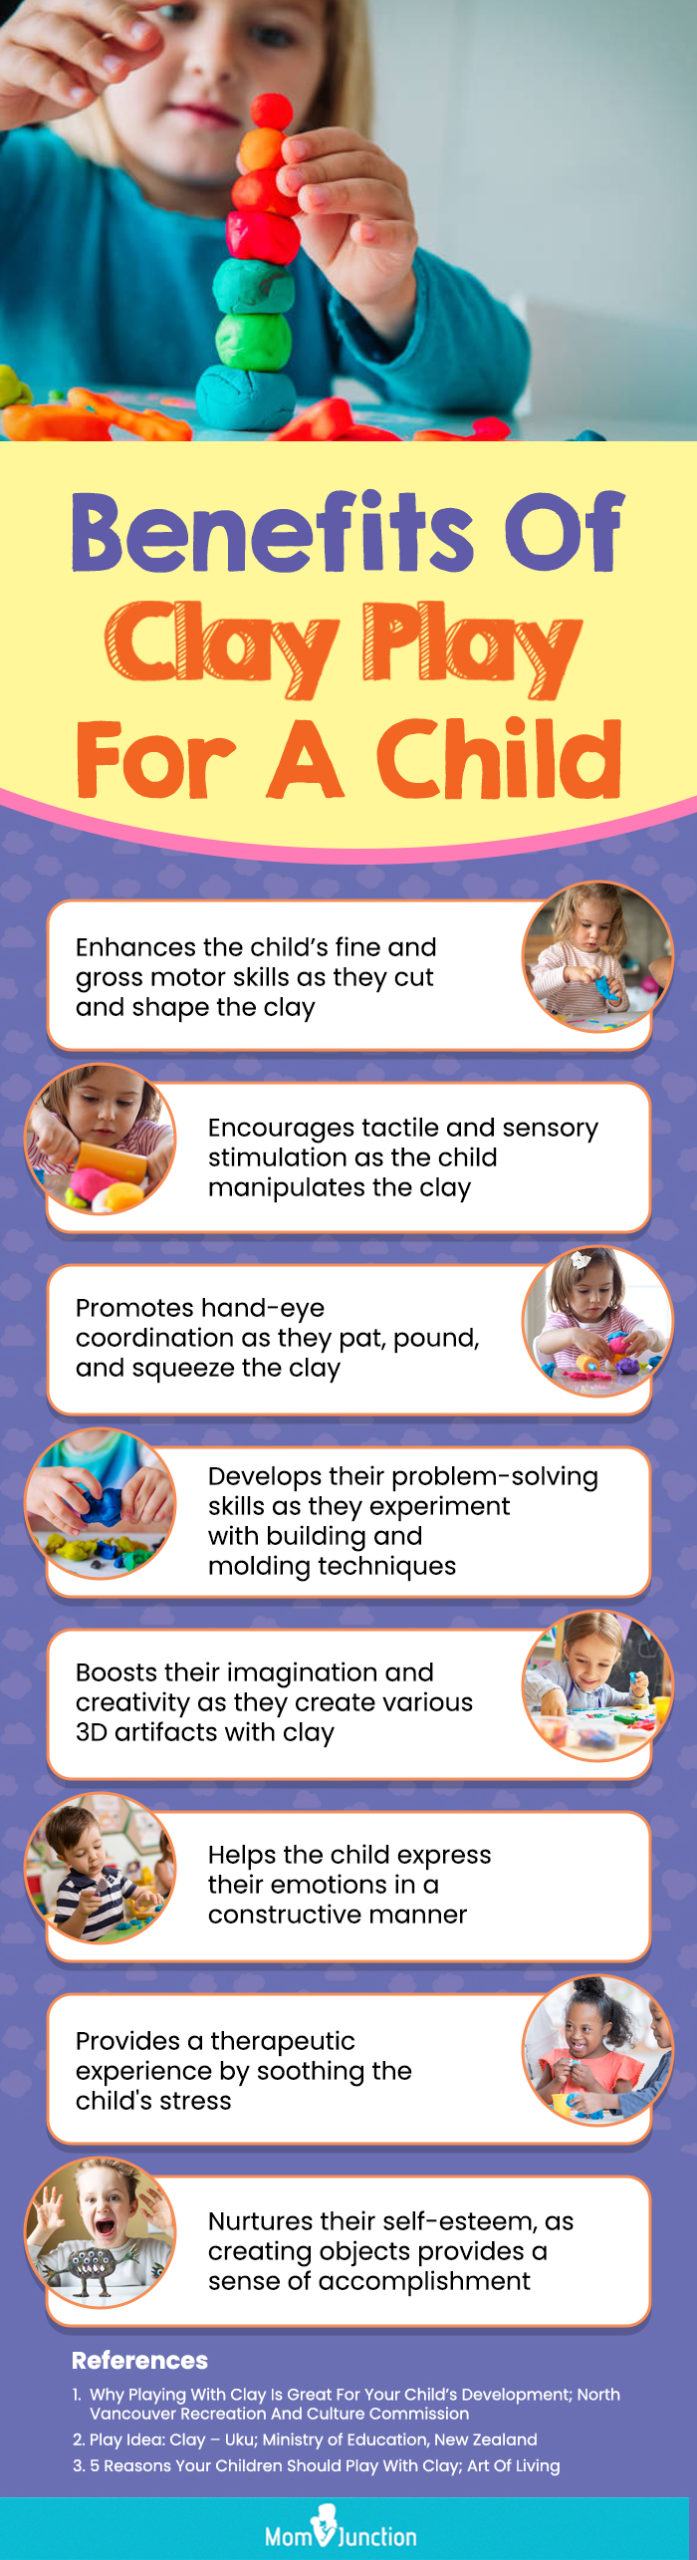 Benefits Of Clay Play For A Child (infographic)